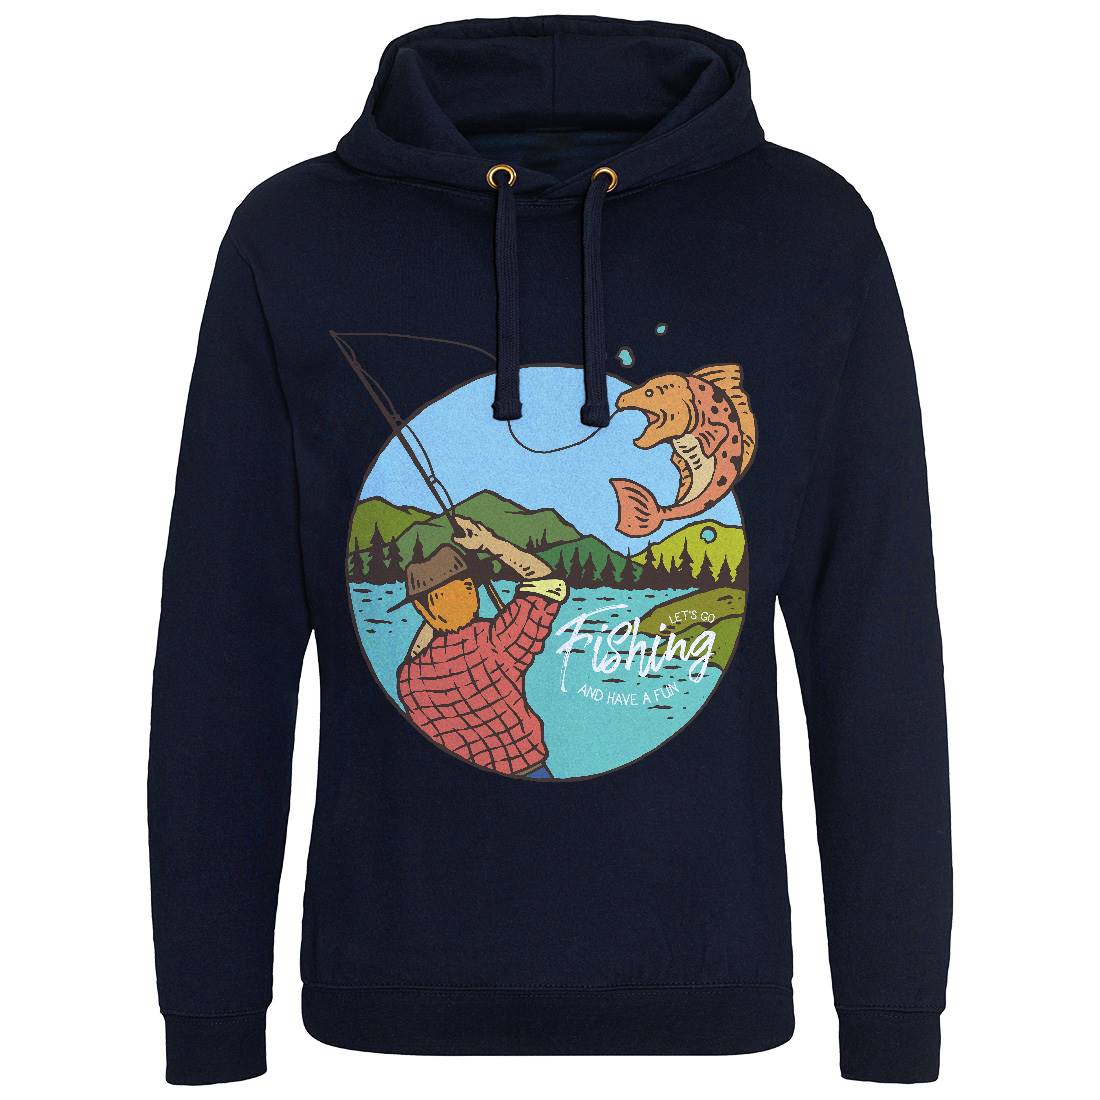 Lets Go Mens Hoodie Without Pocket Fishing C728